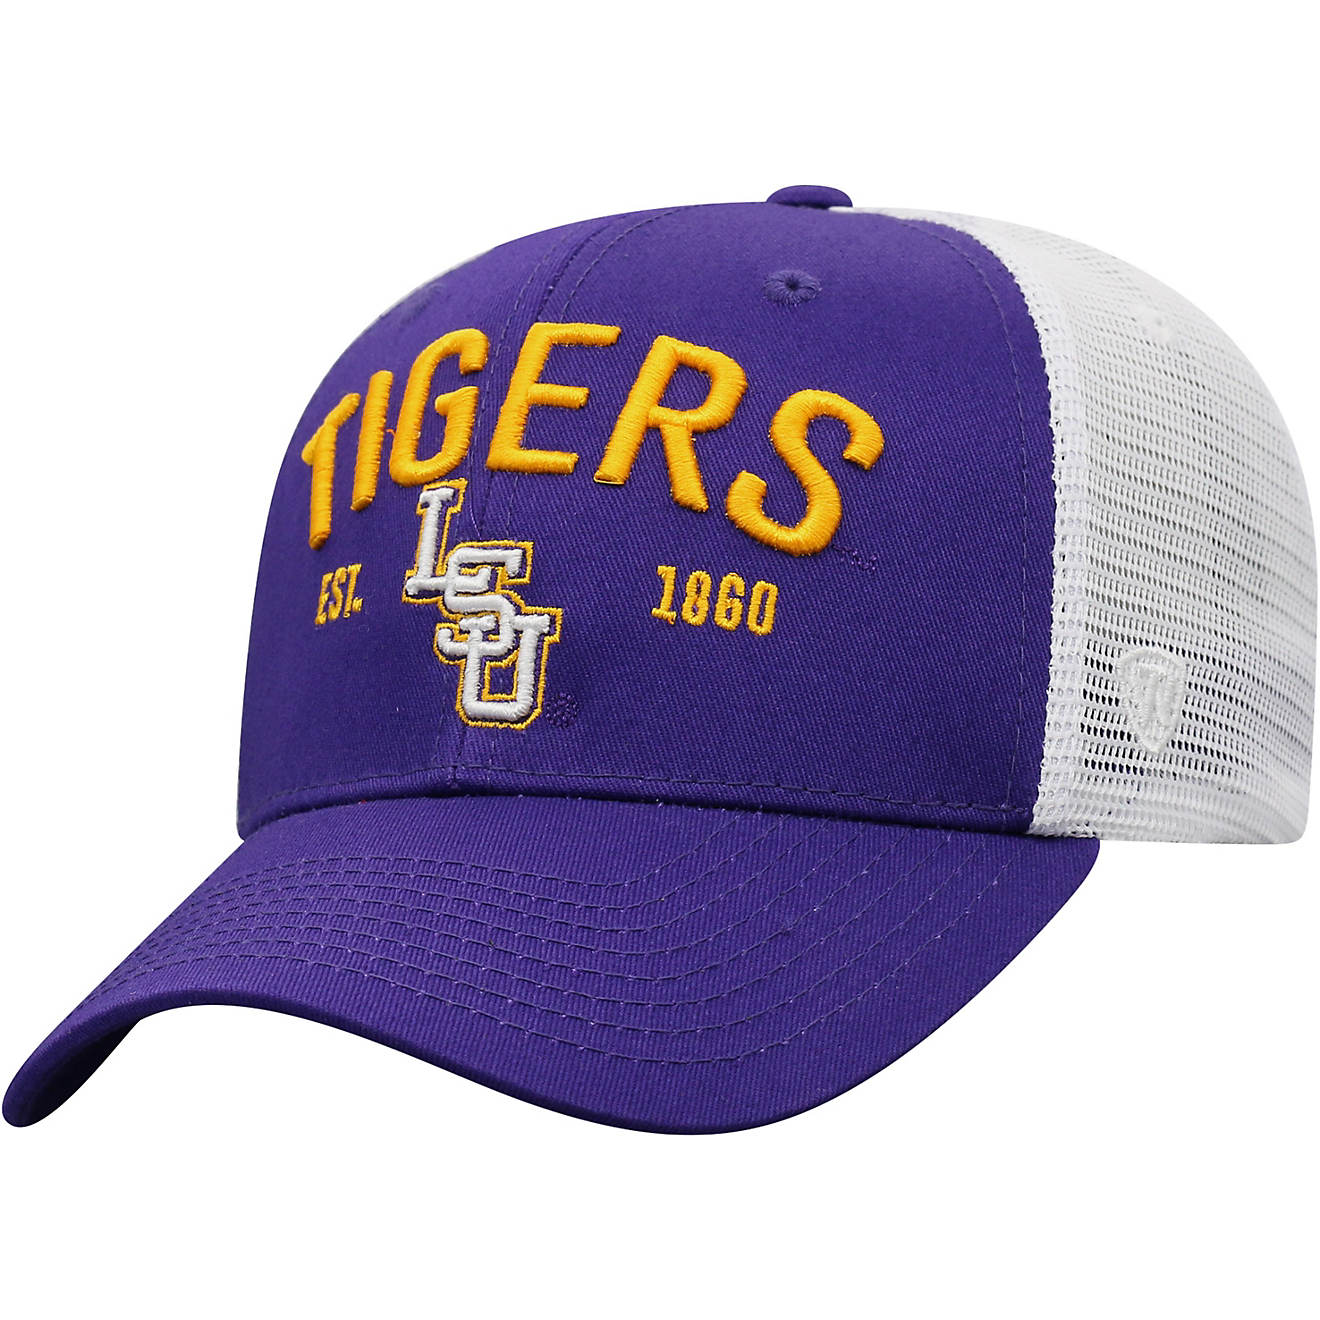 Top of the World Men's Louisiana State University Cotton and Hard Mesh Cap                                                       - view number 1